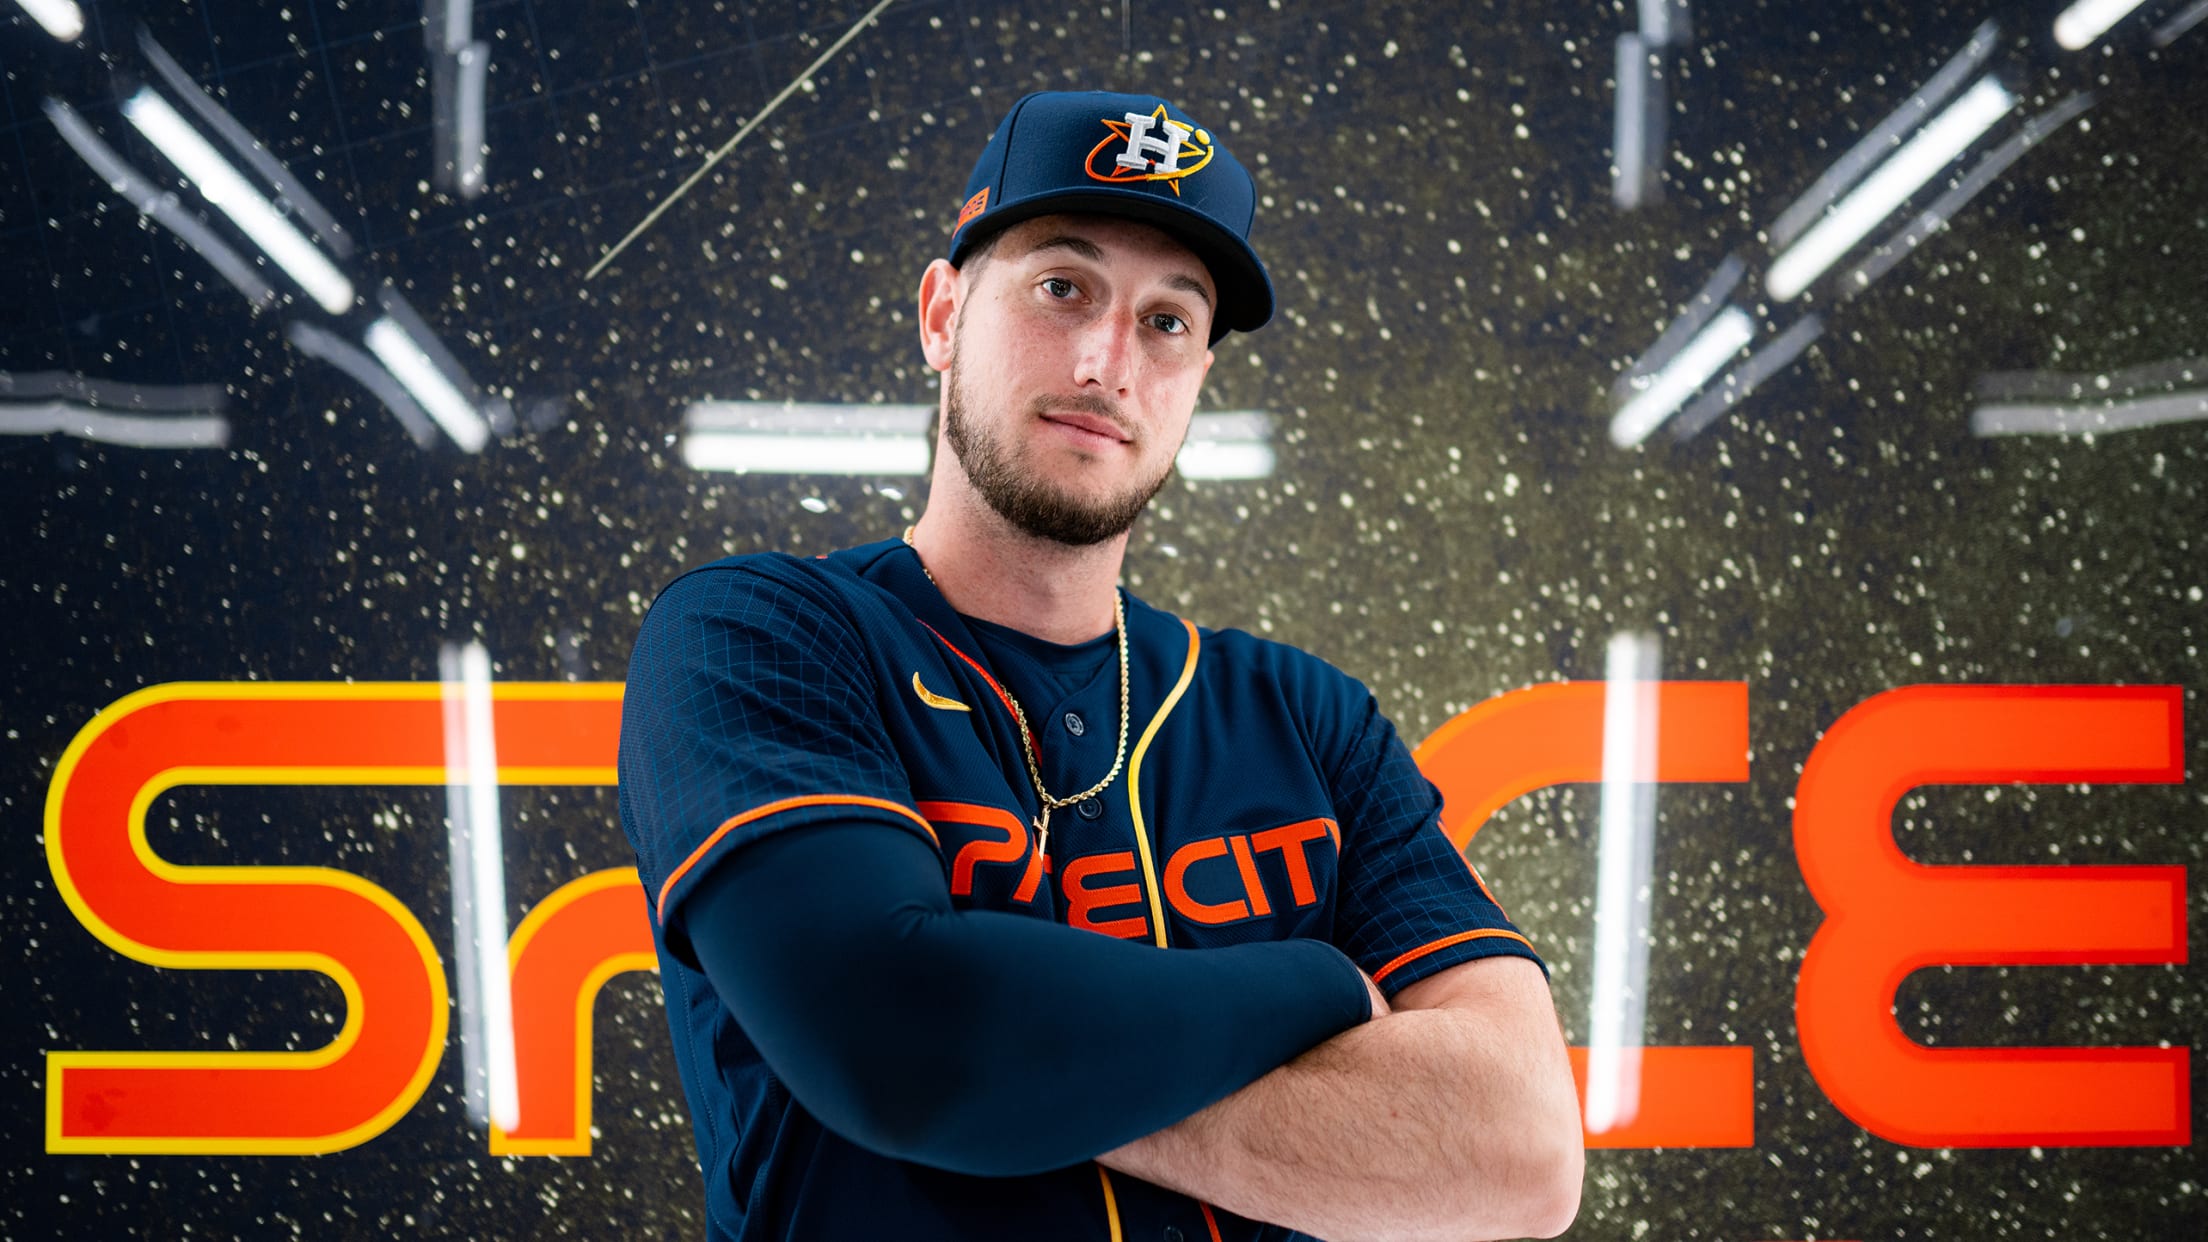 mens astros space city jersey